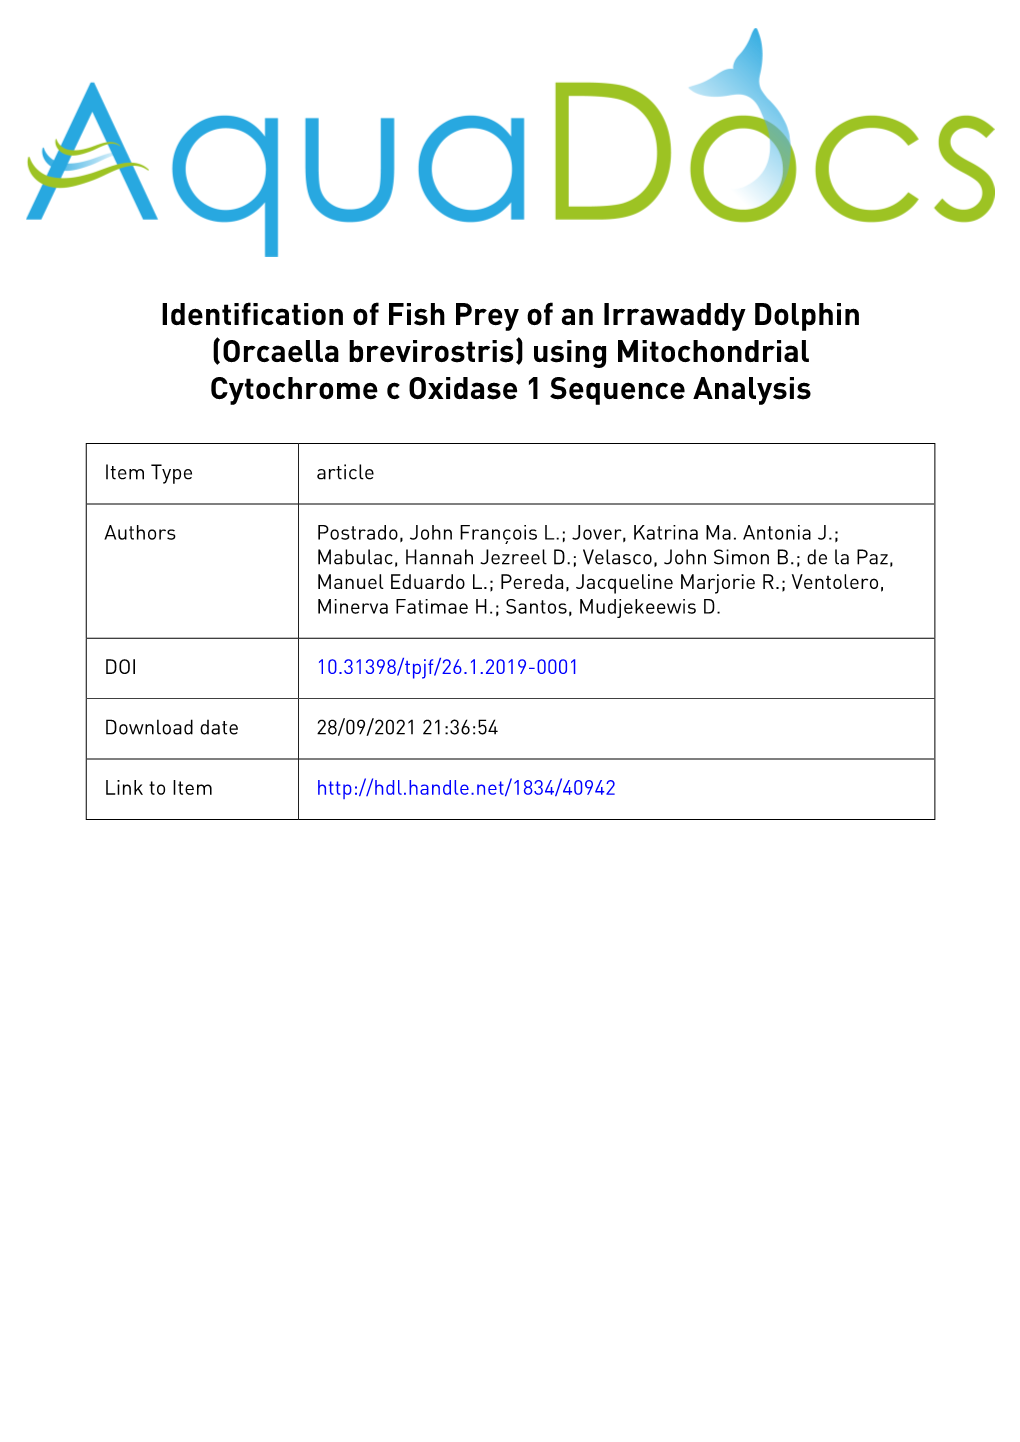 Identification of Fish Prey of an Irrawaddy Dolphin (Orcaella Brevirostris) Using Mitochondrial Cytochrome C Oxidase 1 Sequence Analysis